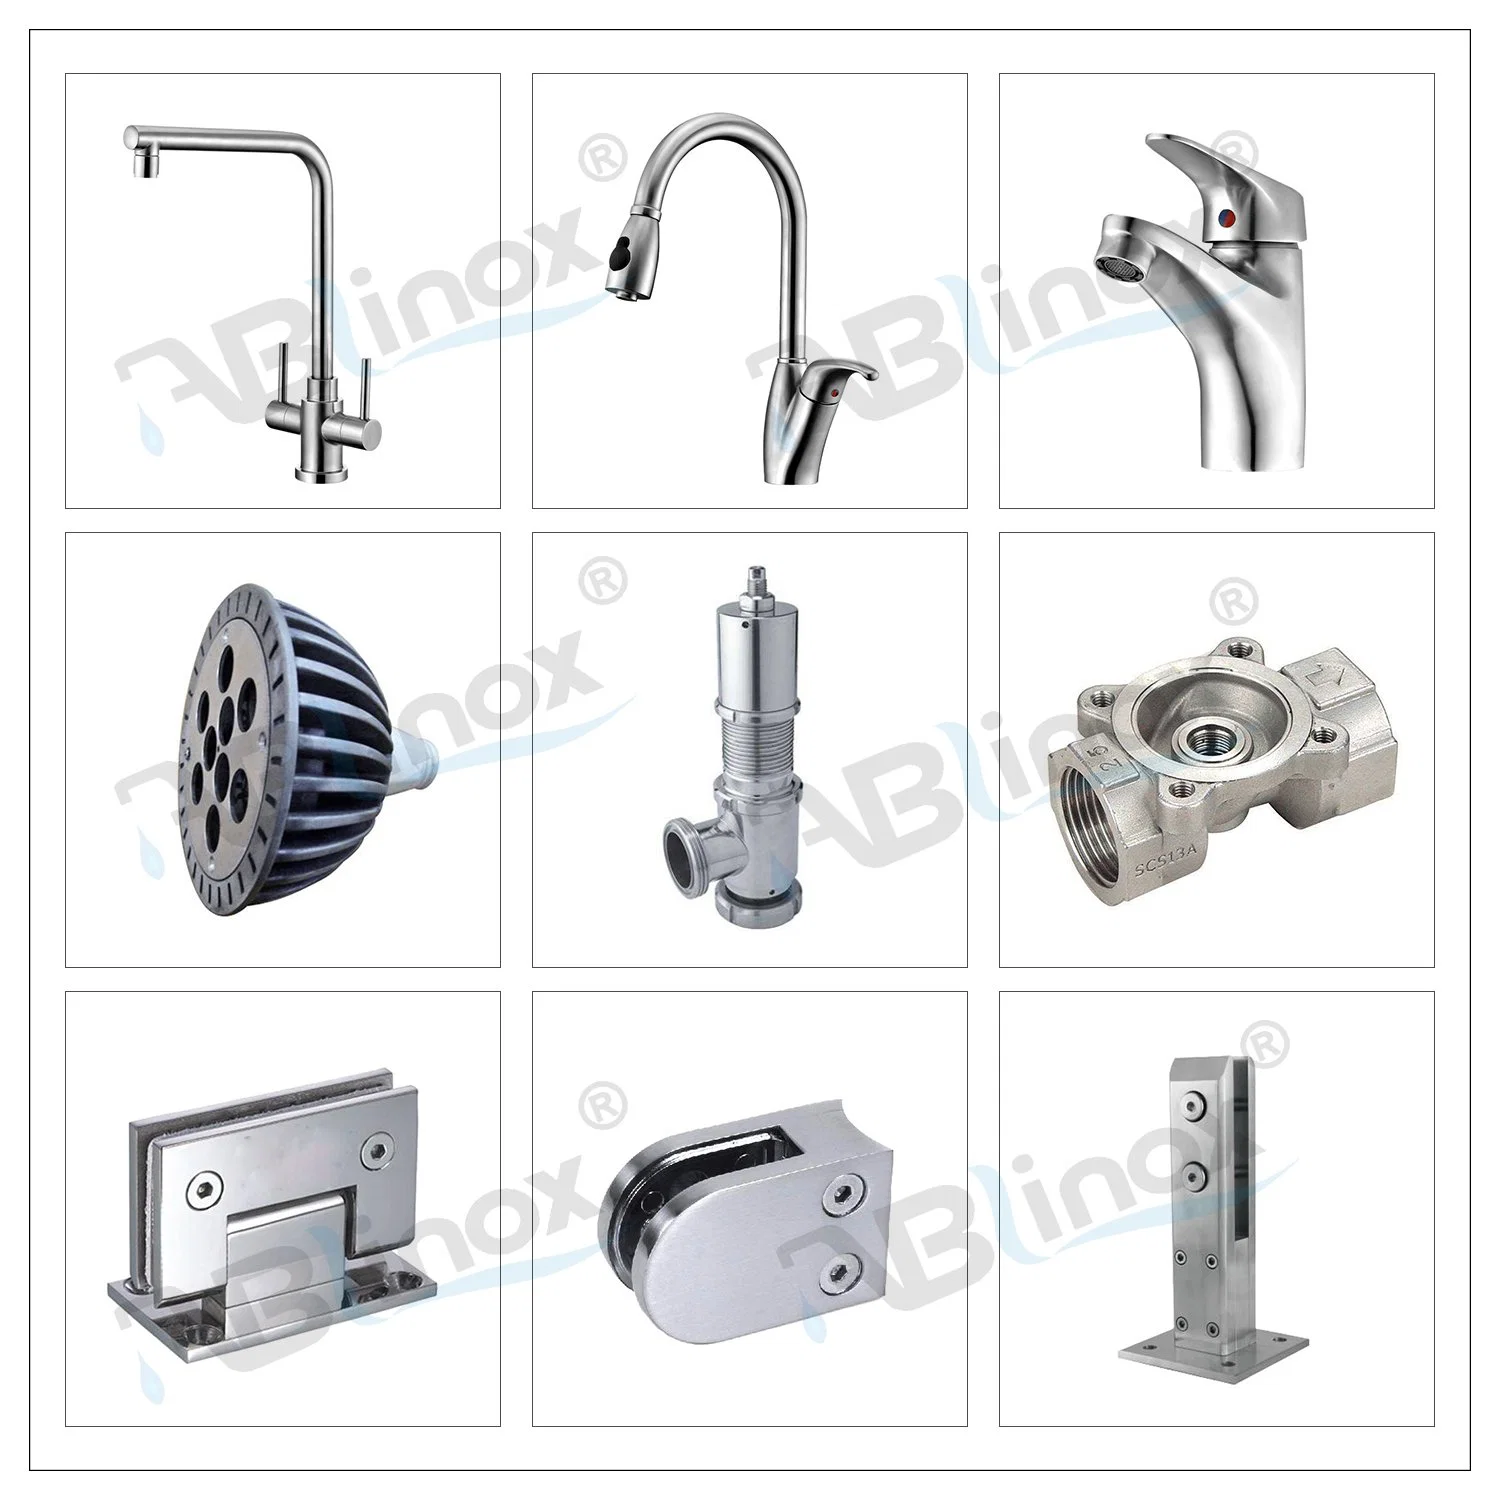 Stainless Steel Handrail Design for Stairs Wall Bracket for Handrail